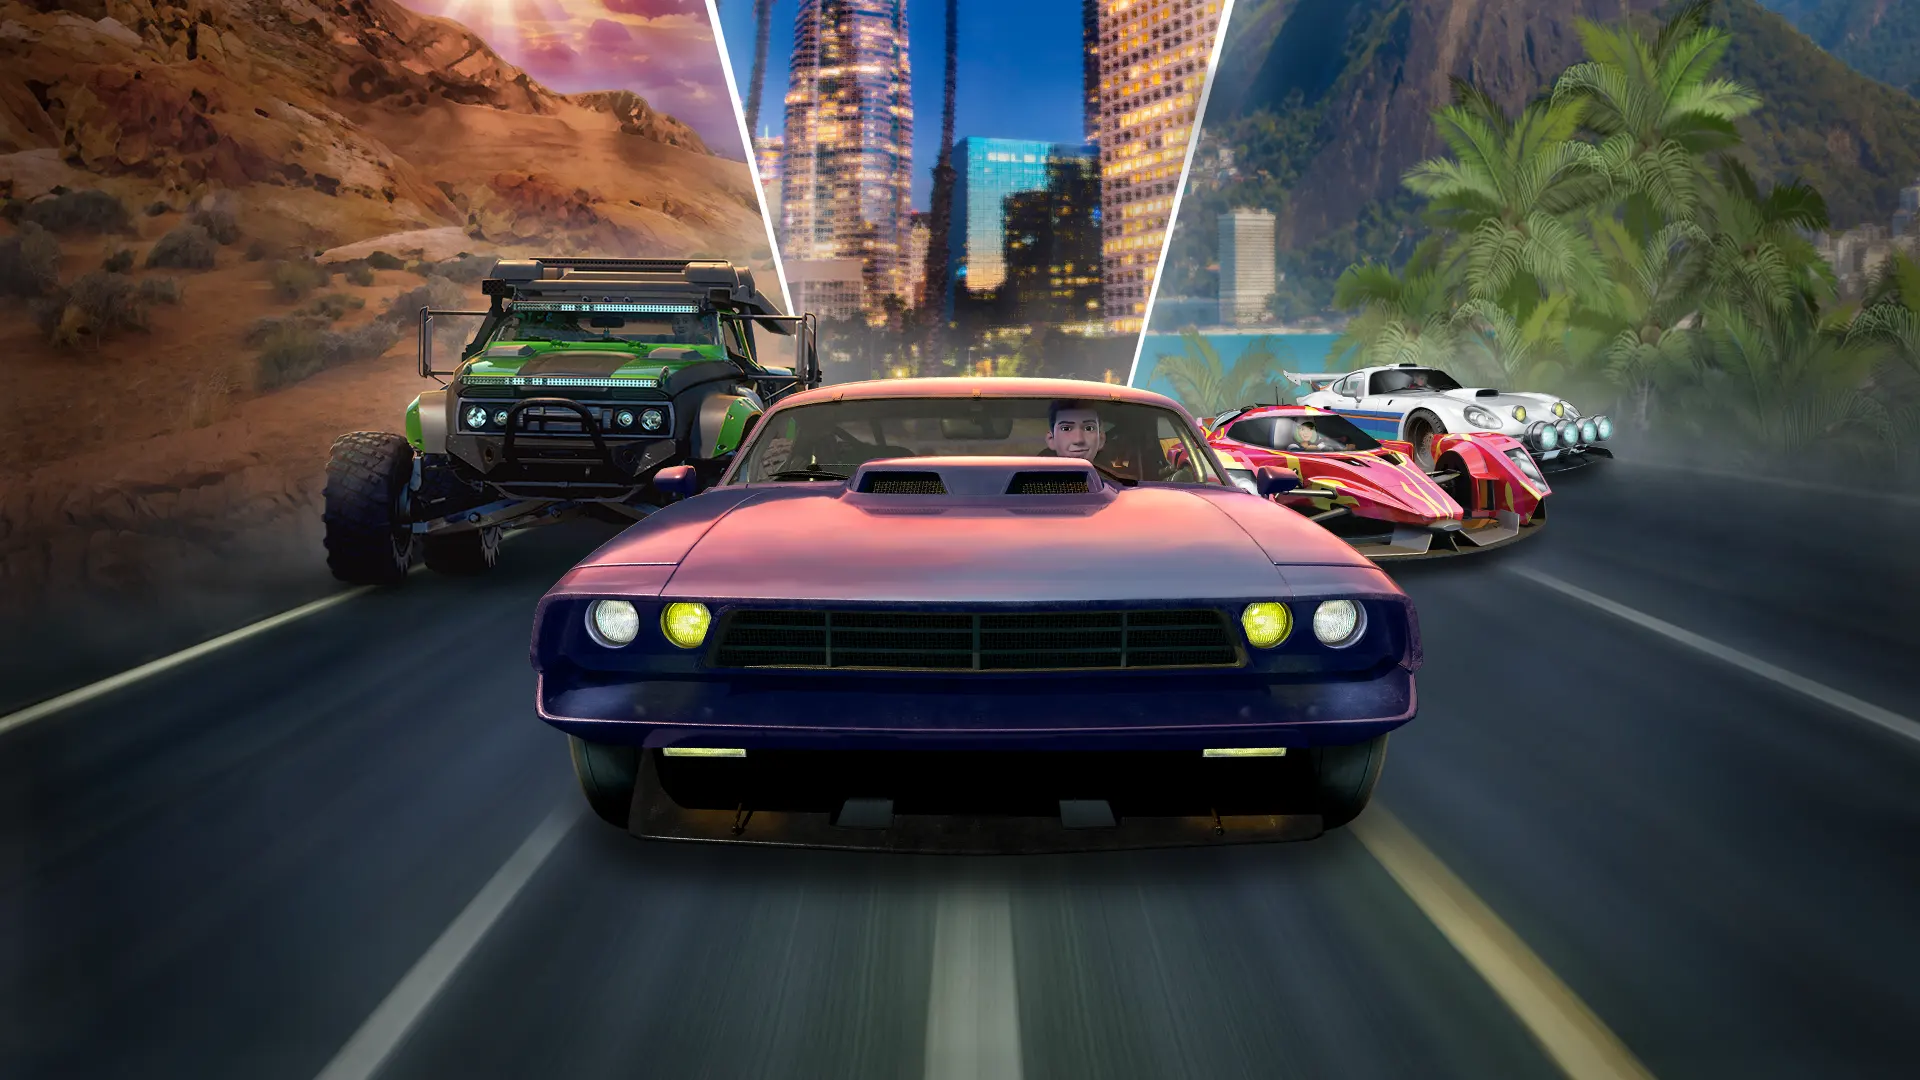 https://outrightgames.com/wp-content/uploads/2021/11/Fast-and-furious-spy-racers-rise-of-sh1t3r-key-art.webp